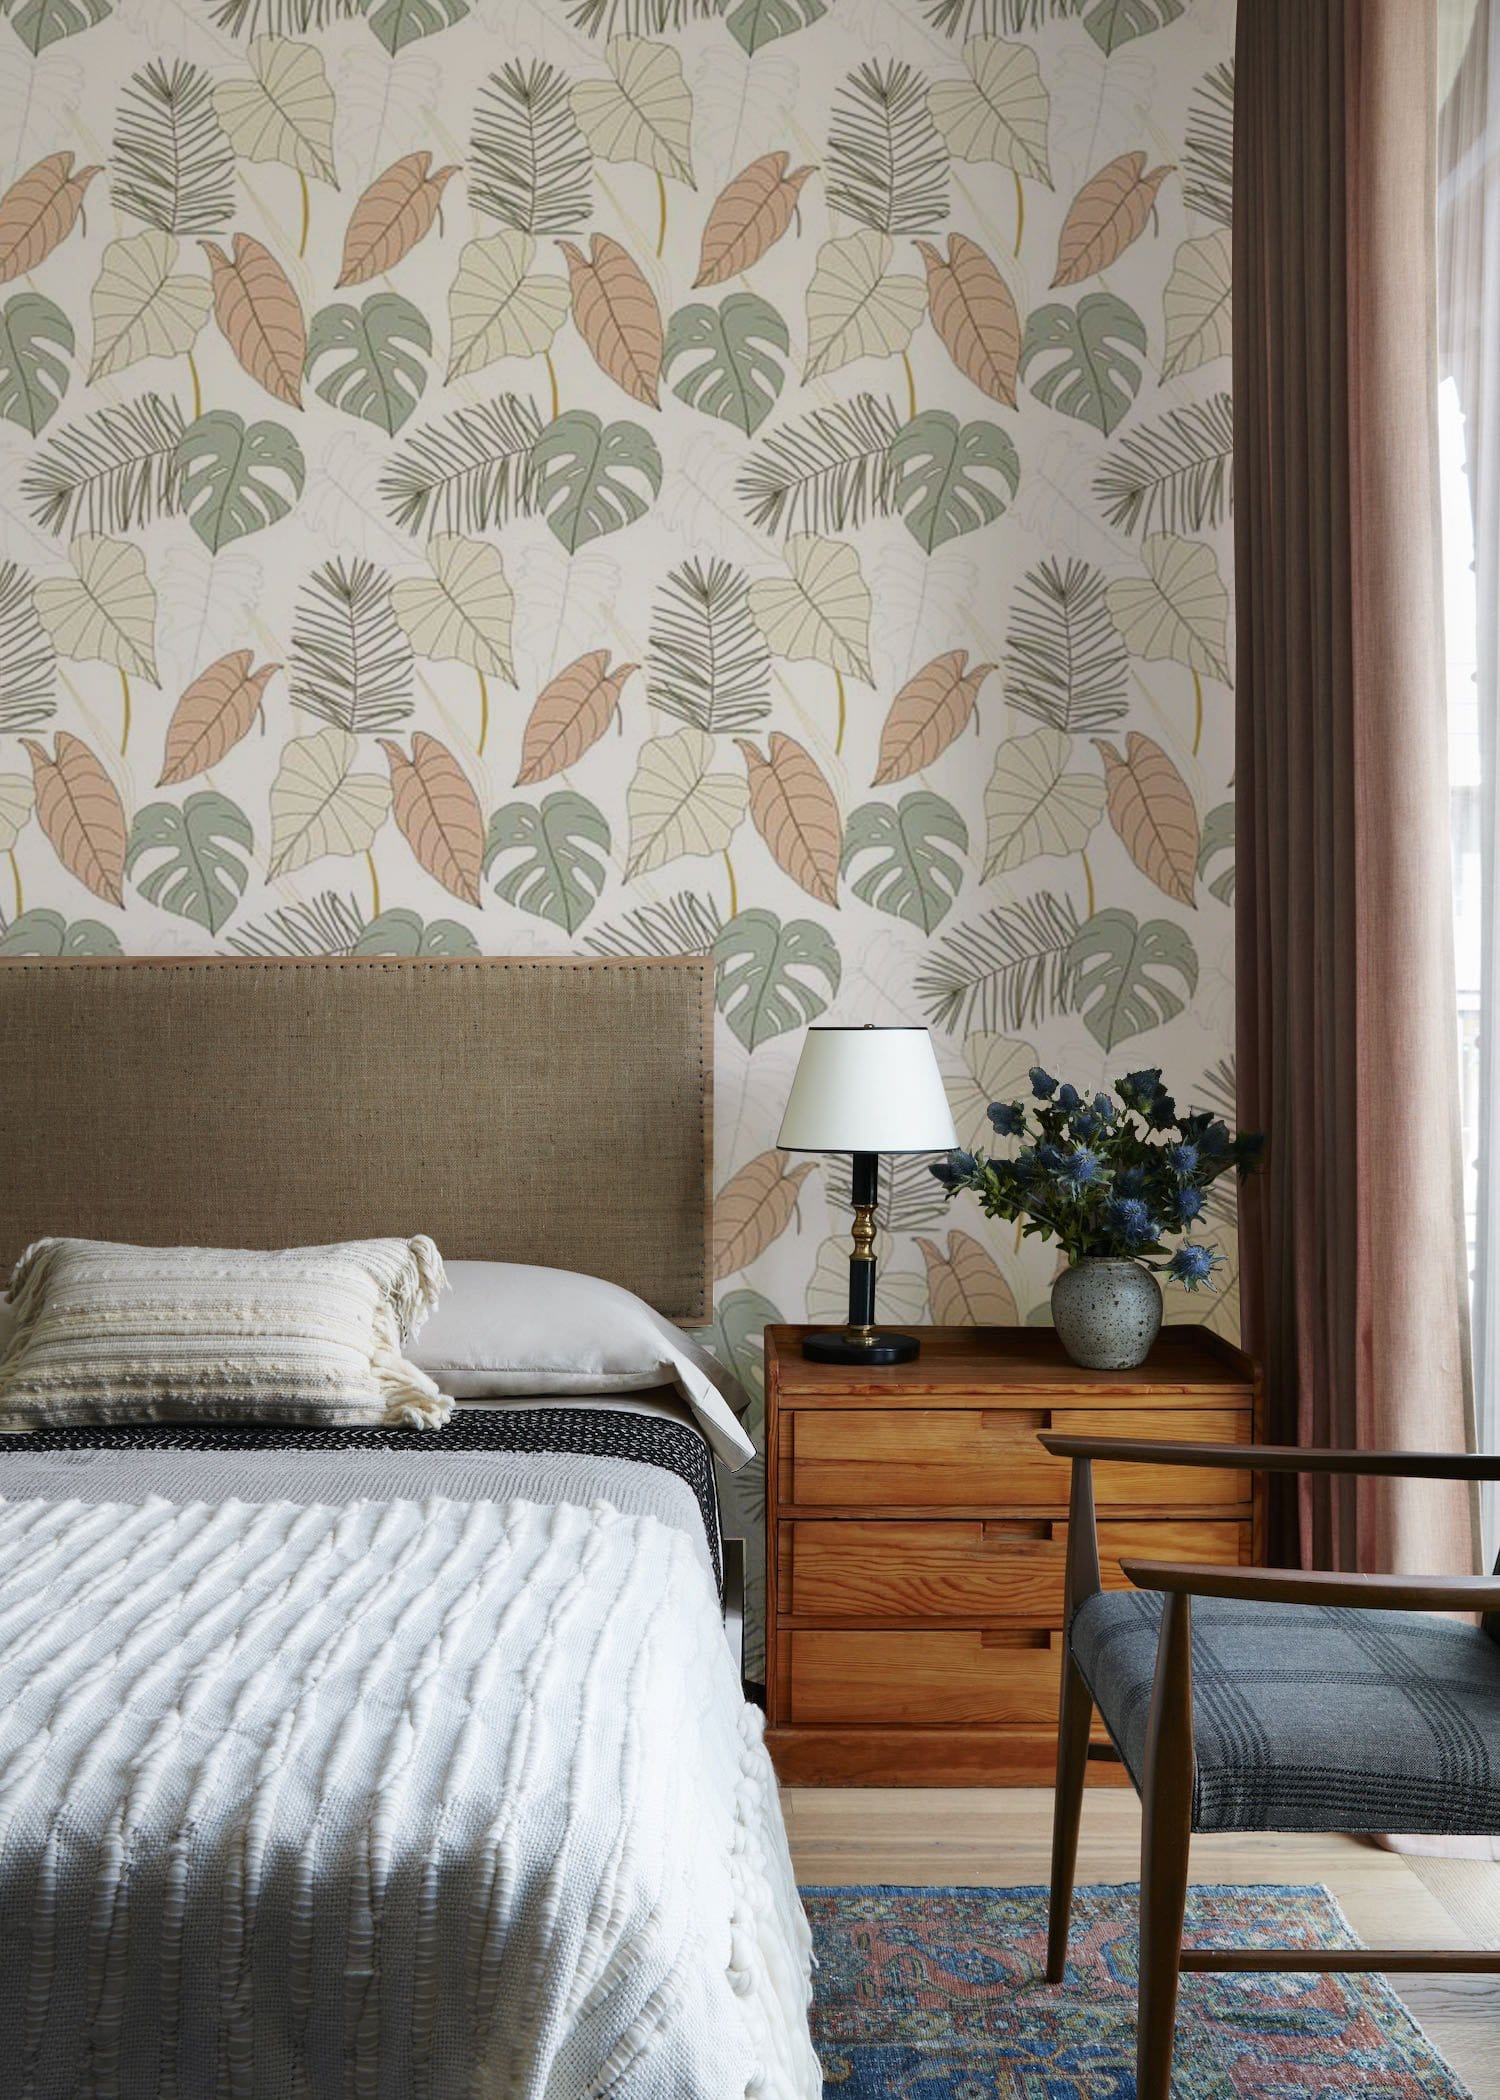 Wall mural wallpaper with trees and leaves, suitable for use as bedroom décor